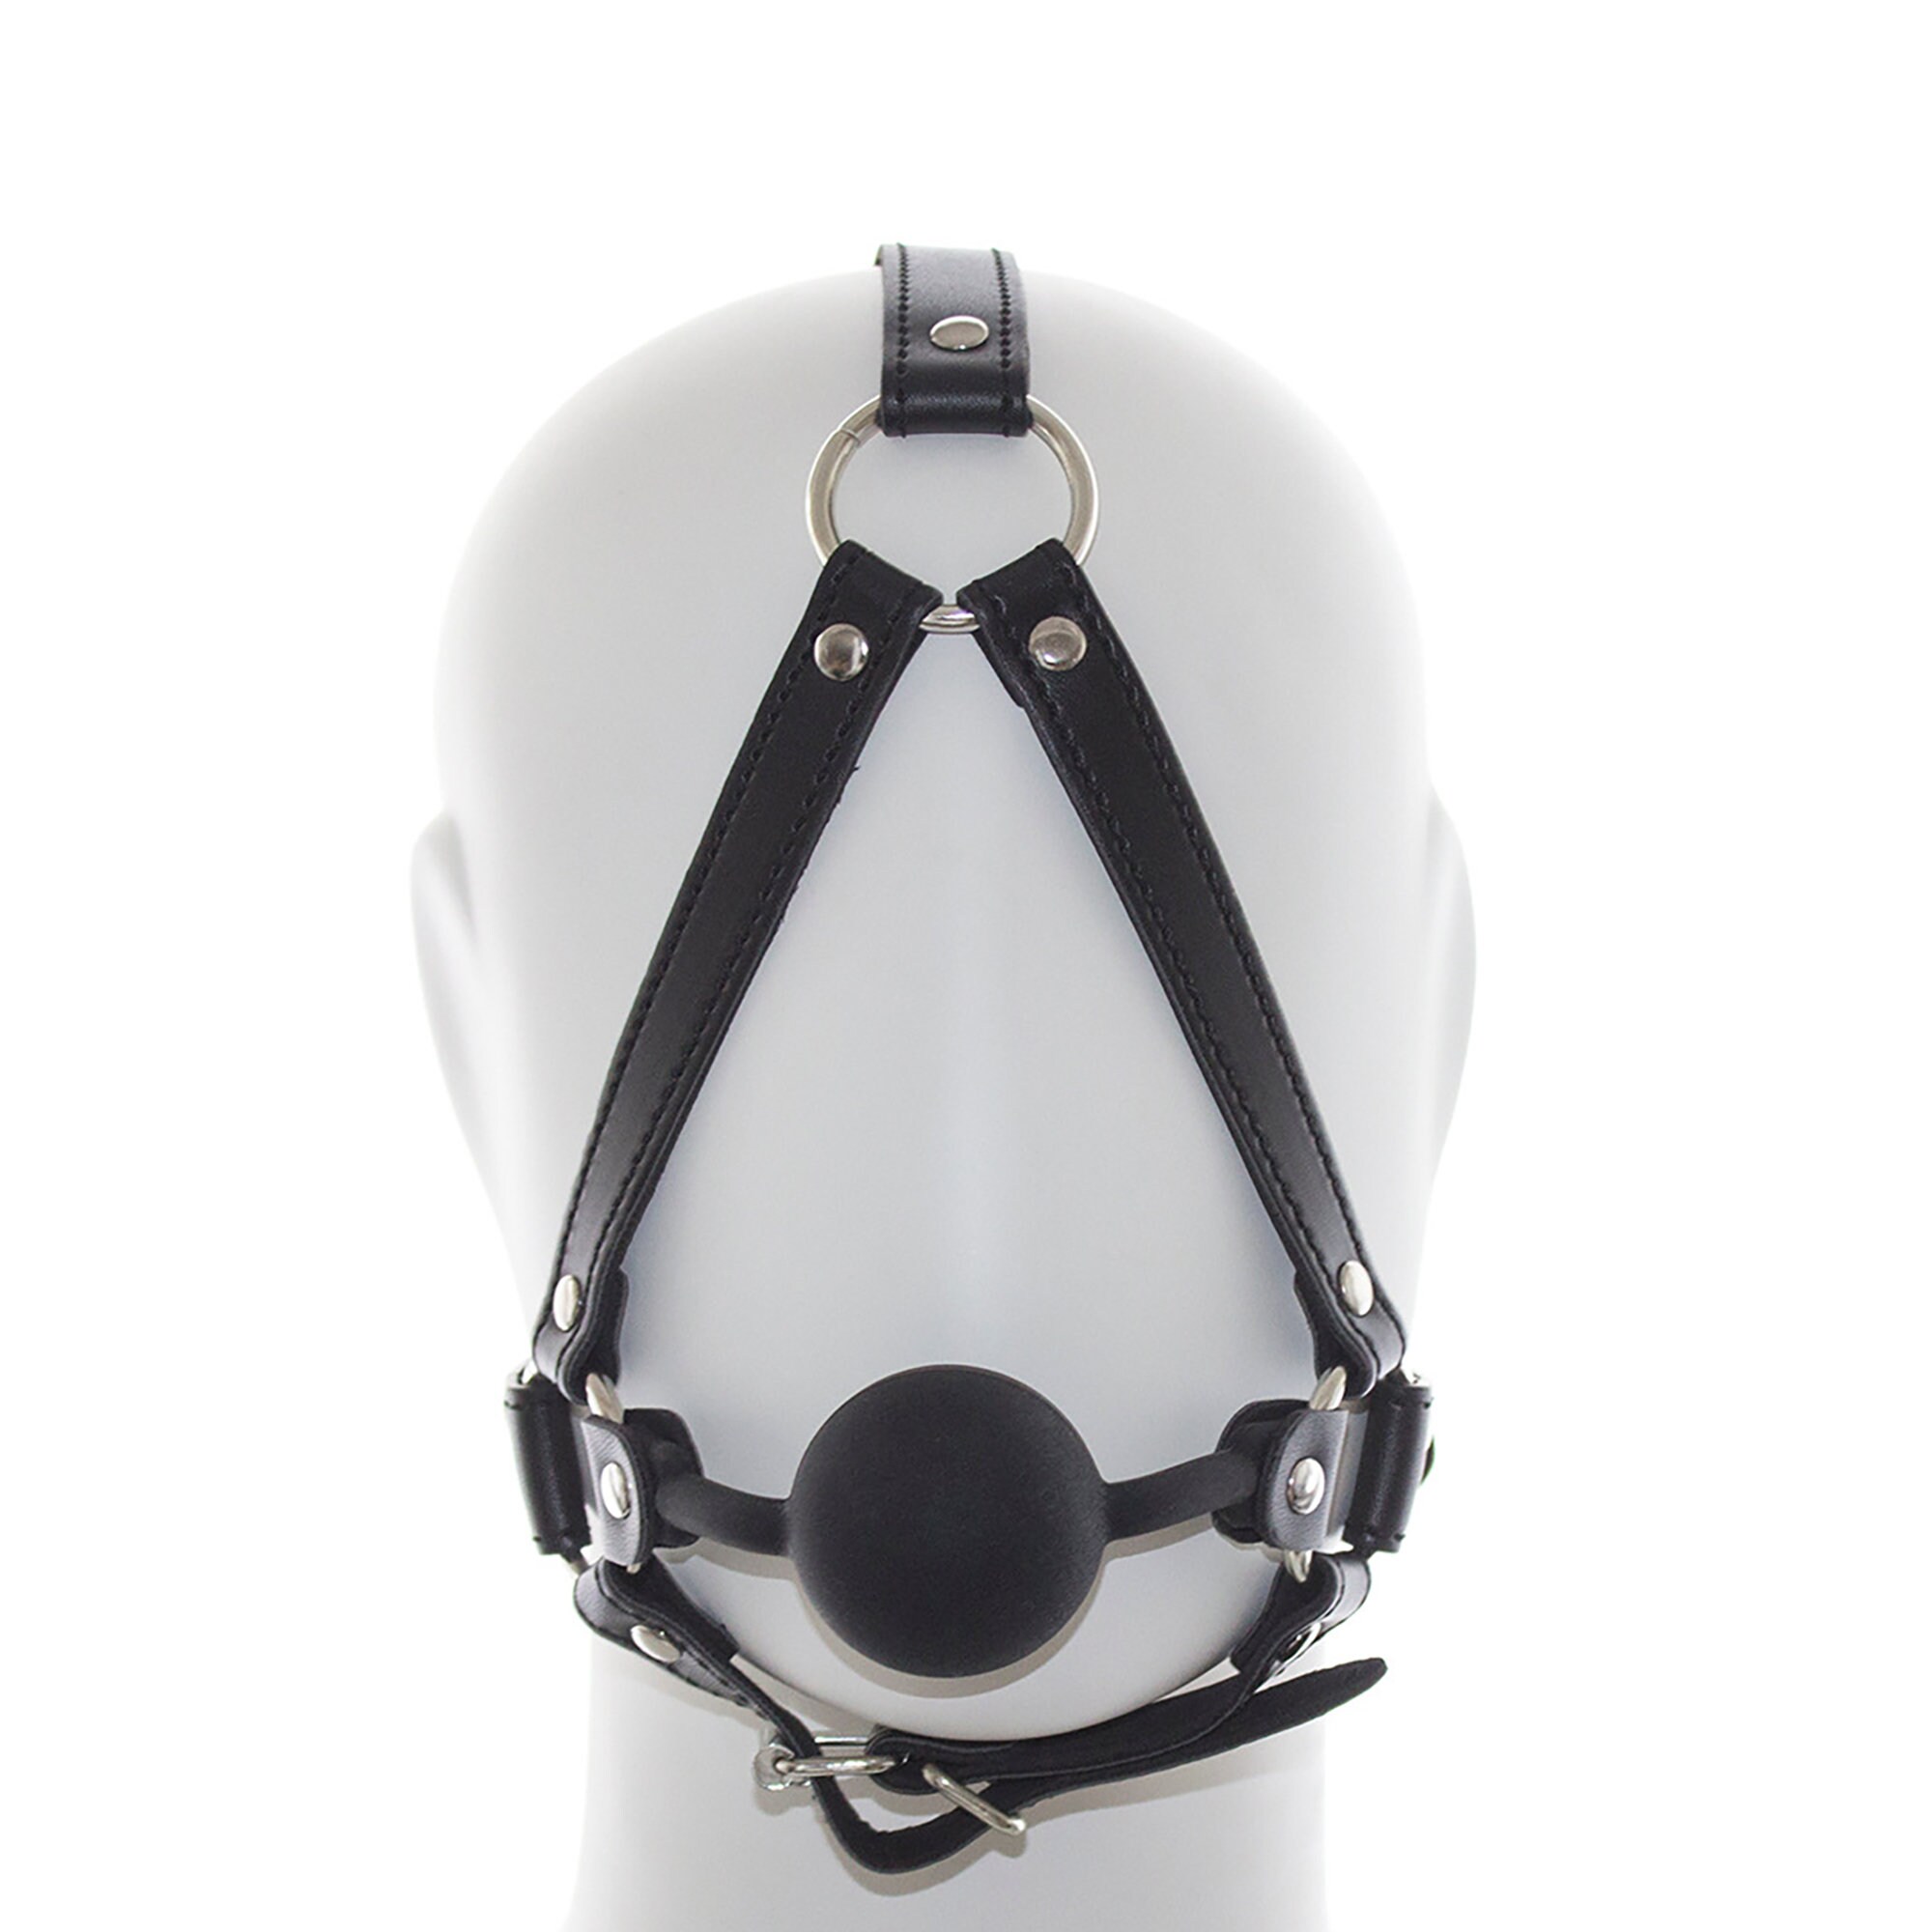 BDSM SM Bondage Mouth Gag Ball Gag With Head Strap and Black Rubber Ball or  Red Silicone Ball / Gold Rivets / Lockable Roller Buckle -  Denmark